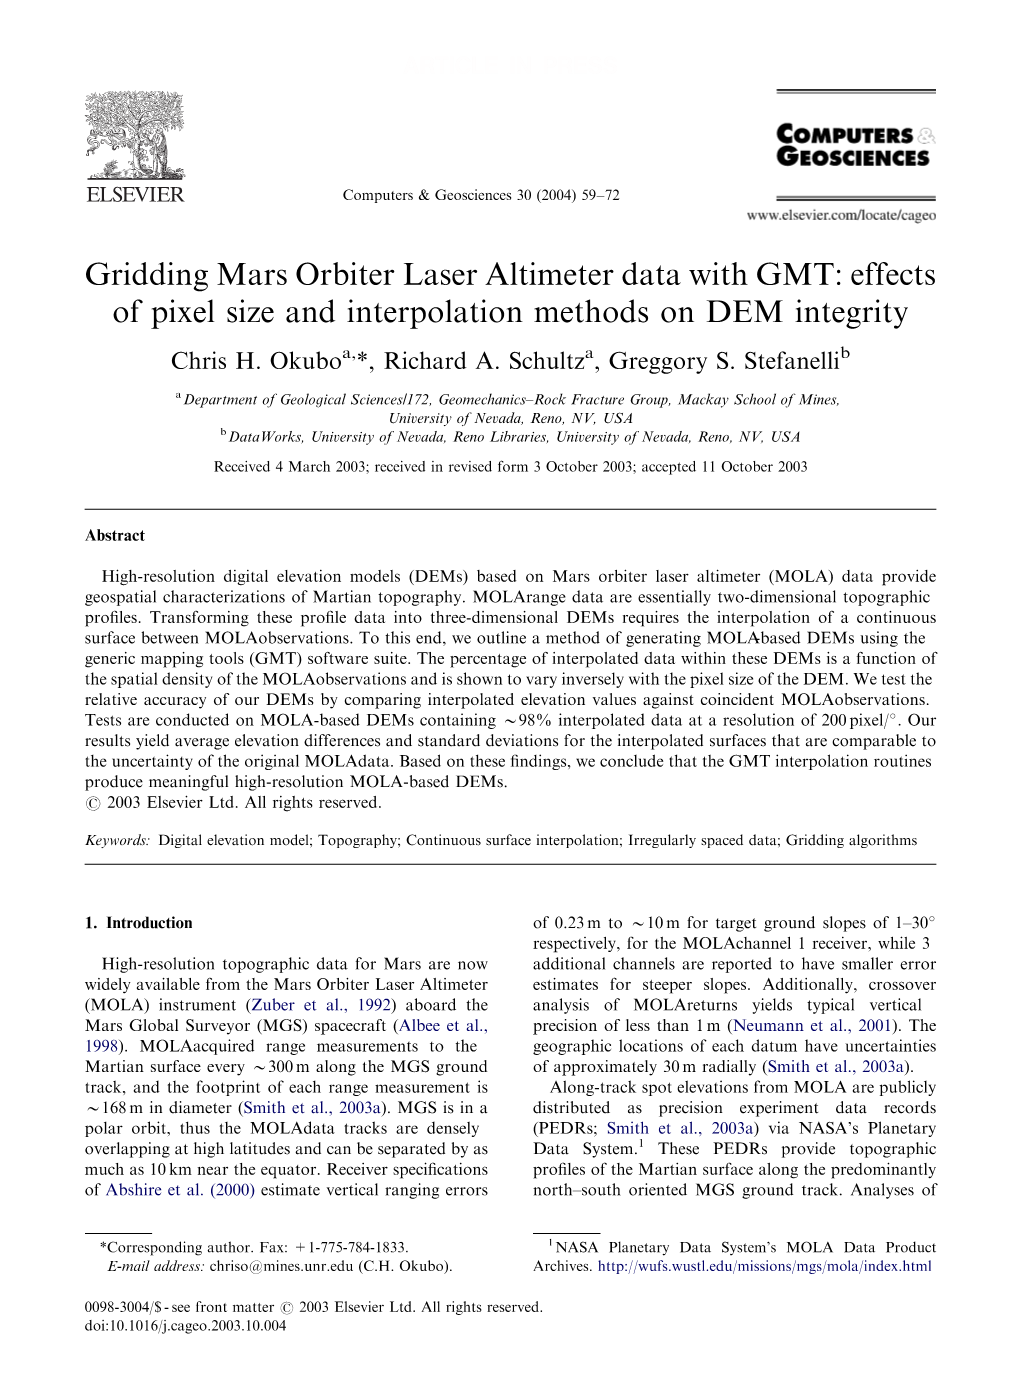 Gridding Mars Orbiter Laser Altimeter Data with GMT: Effects of Pixel Size and Interpolation Methods on DEM Integrity Chris H